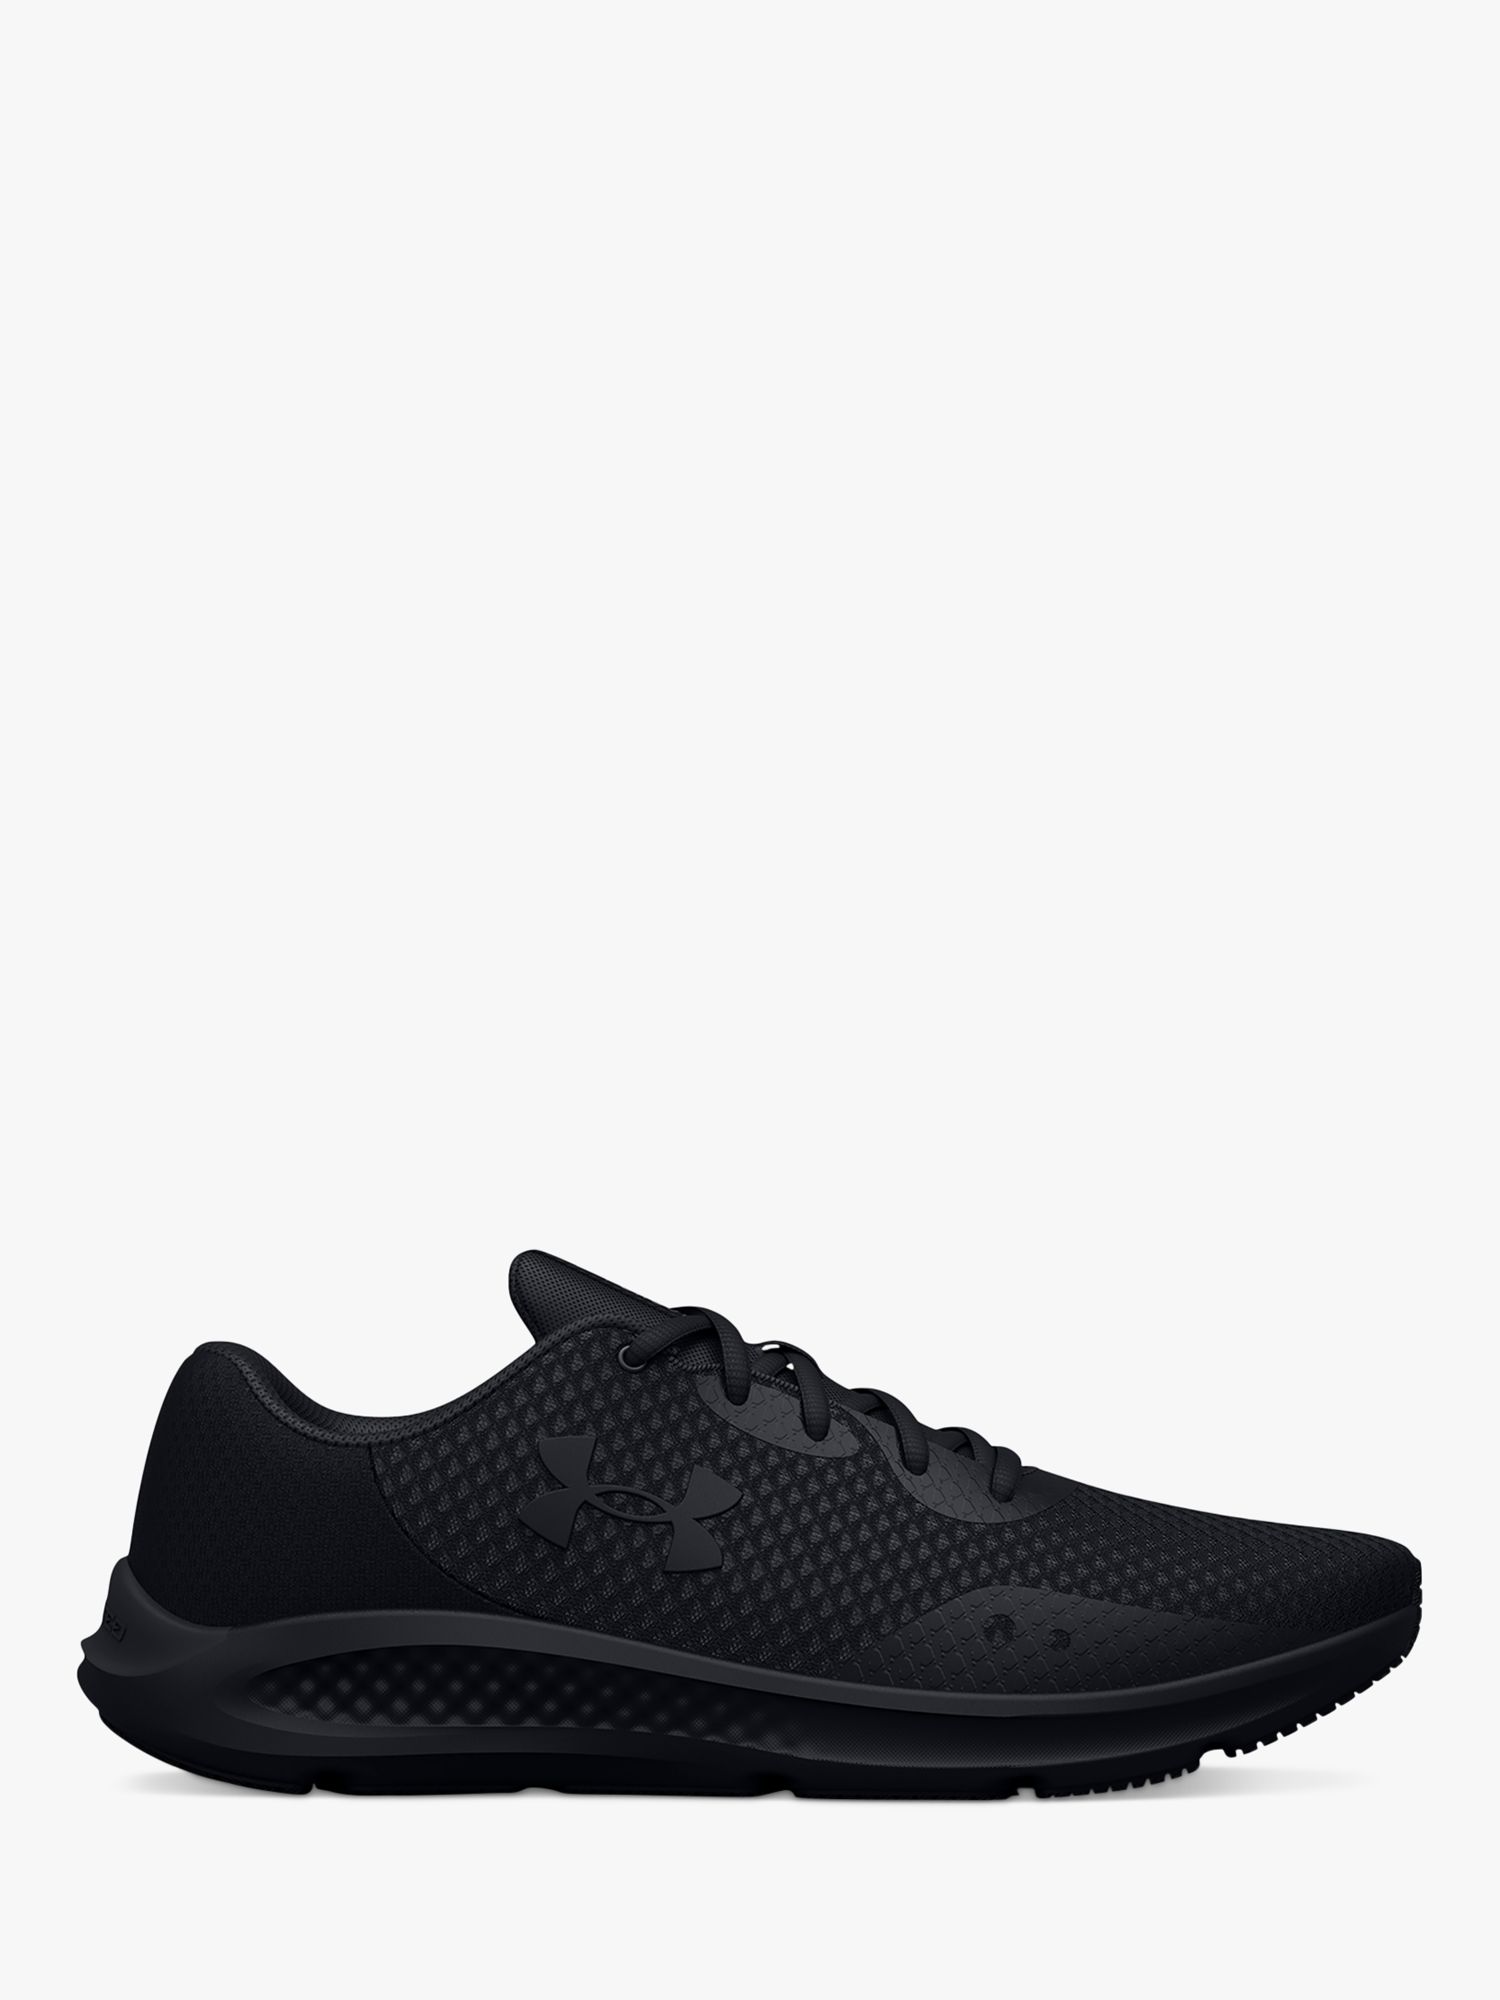 Under Armour Charged Pursuit 3 Women's Running Shoes, Black at John Lewis &  Partners